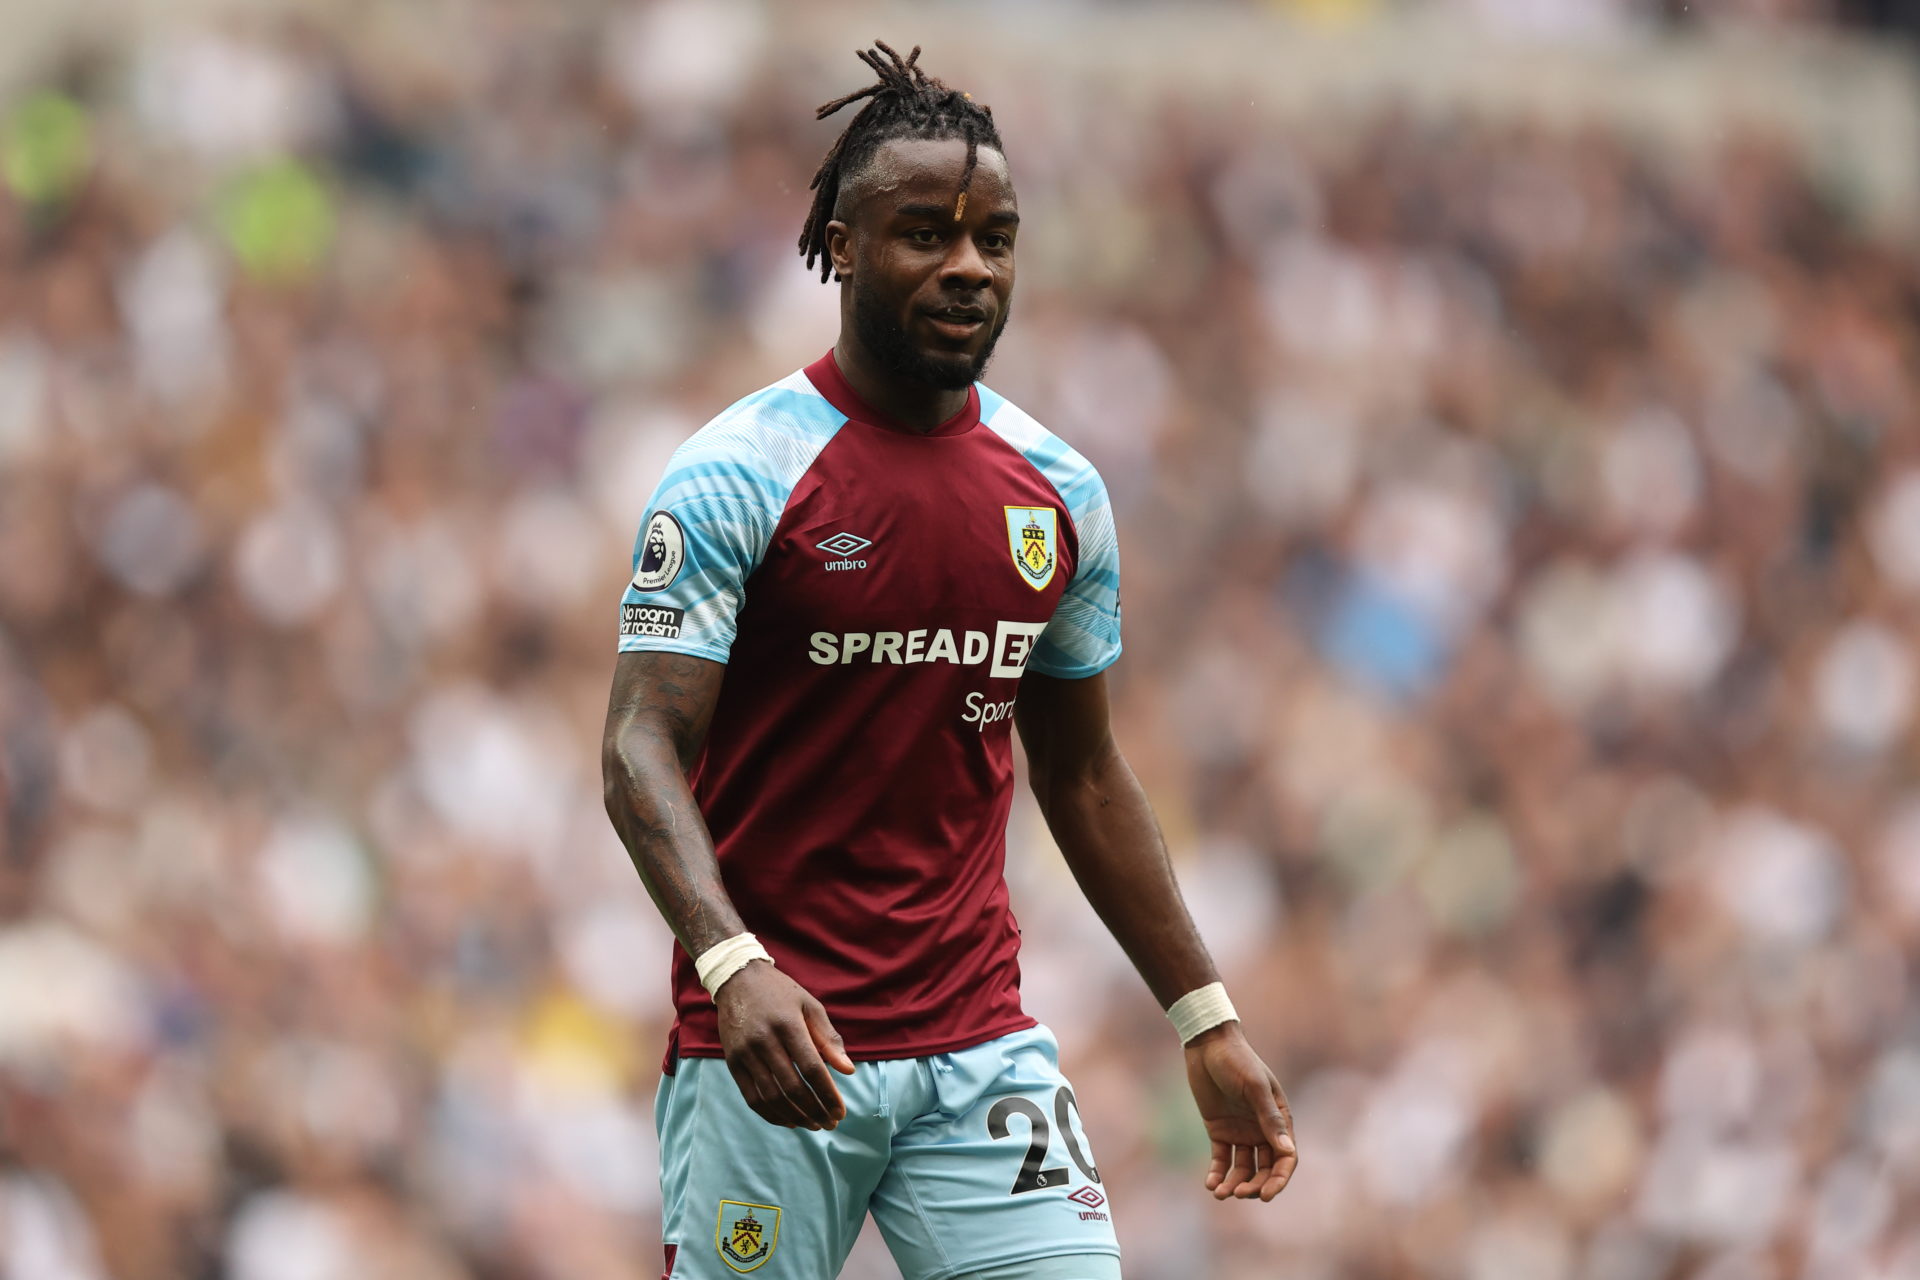 West Ham may now have to pay more for Maxwel Cornet